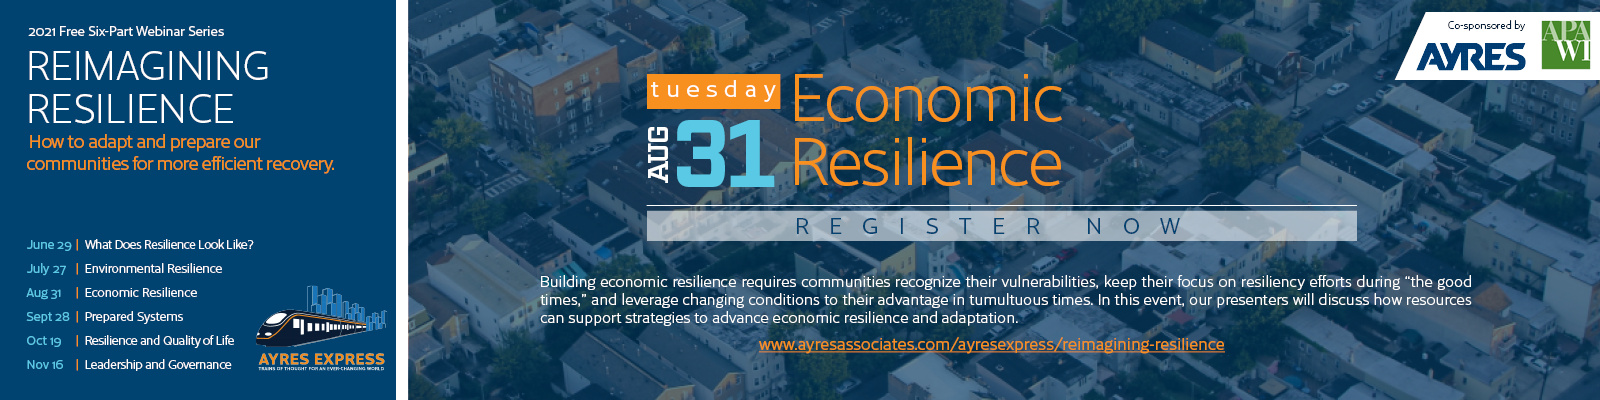 Economic Resilience Banner